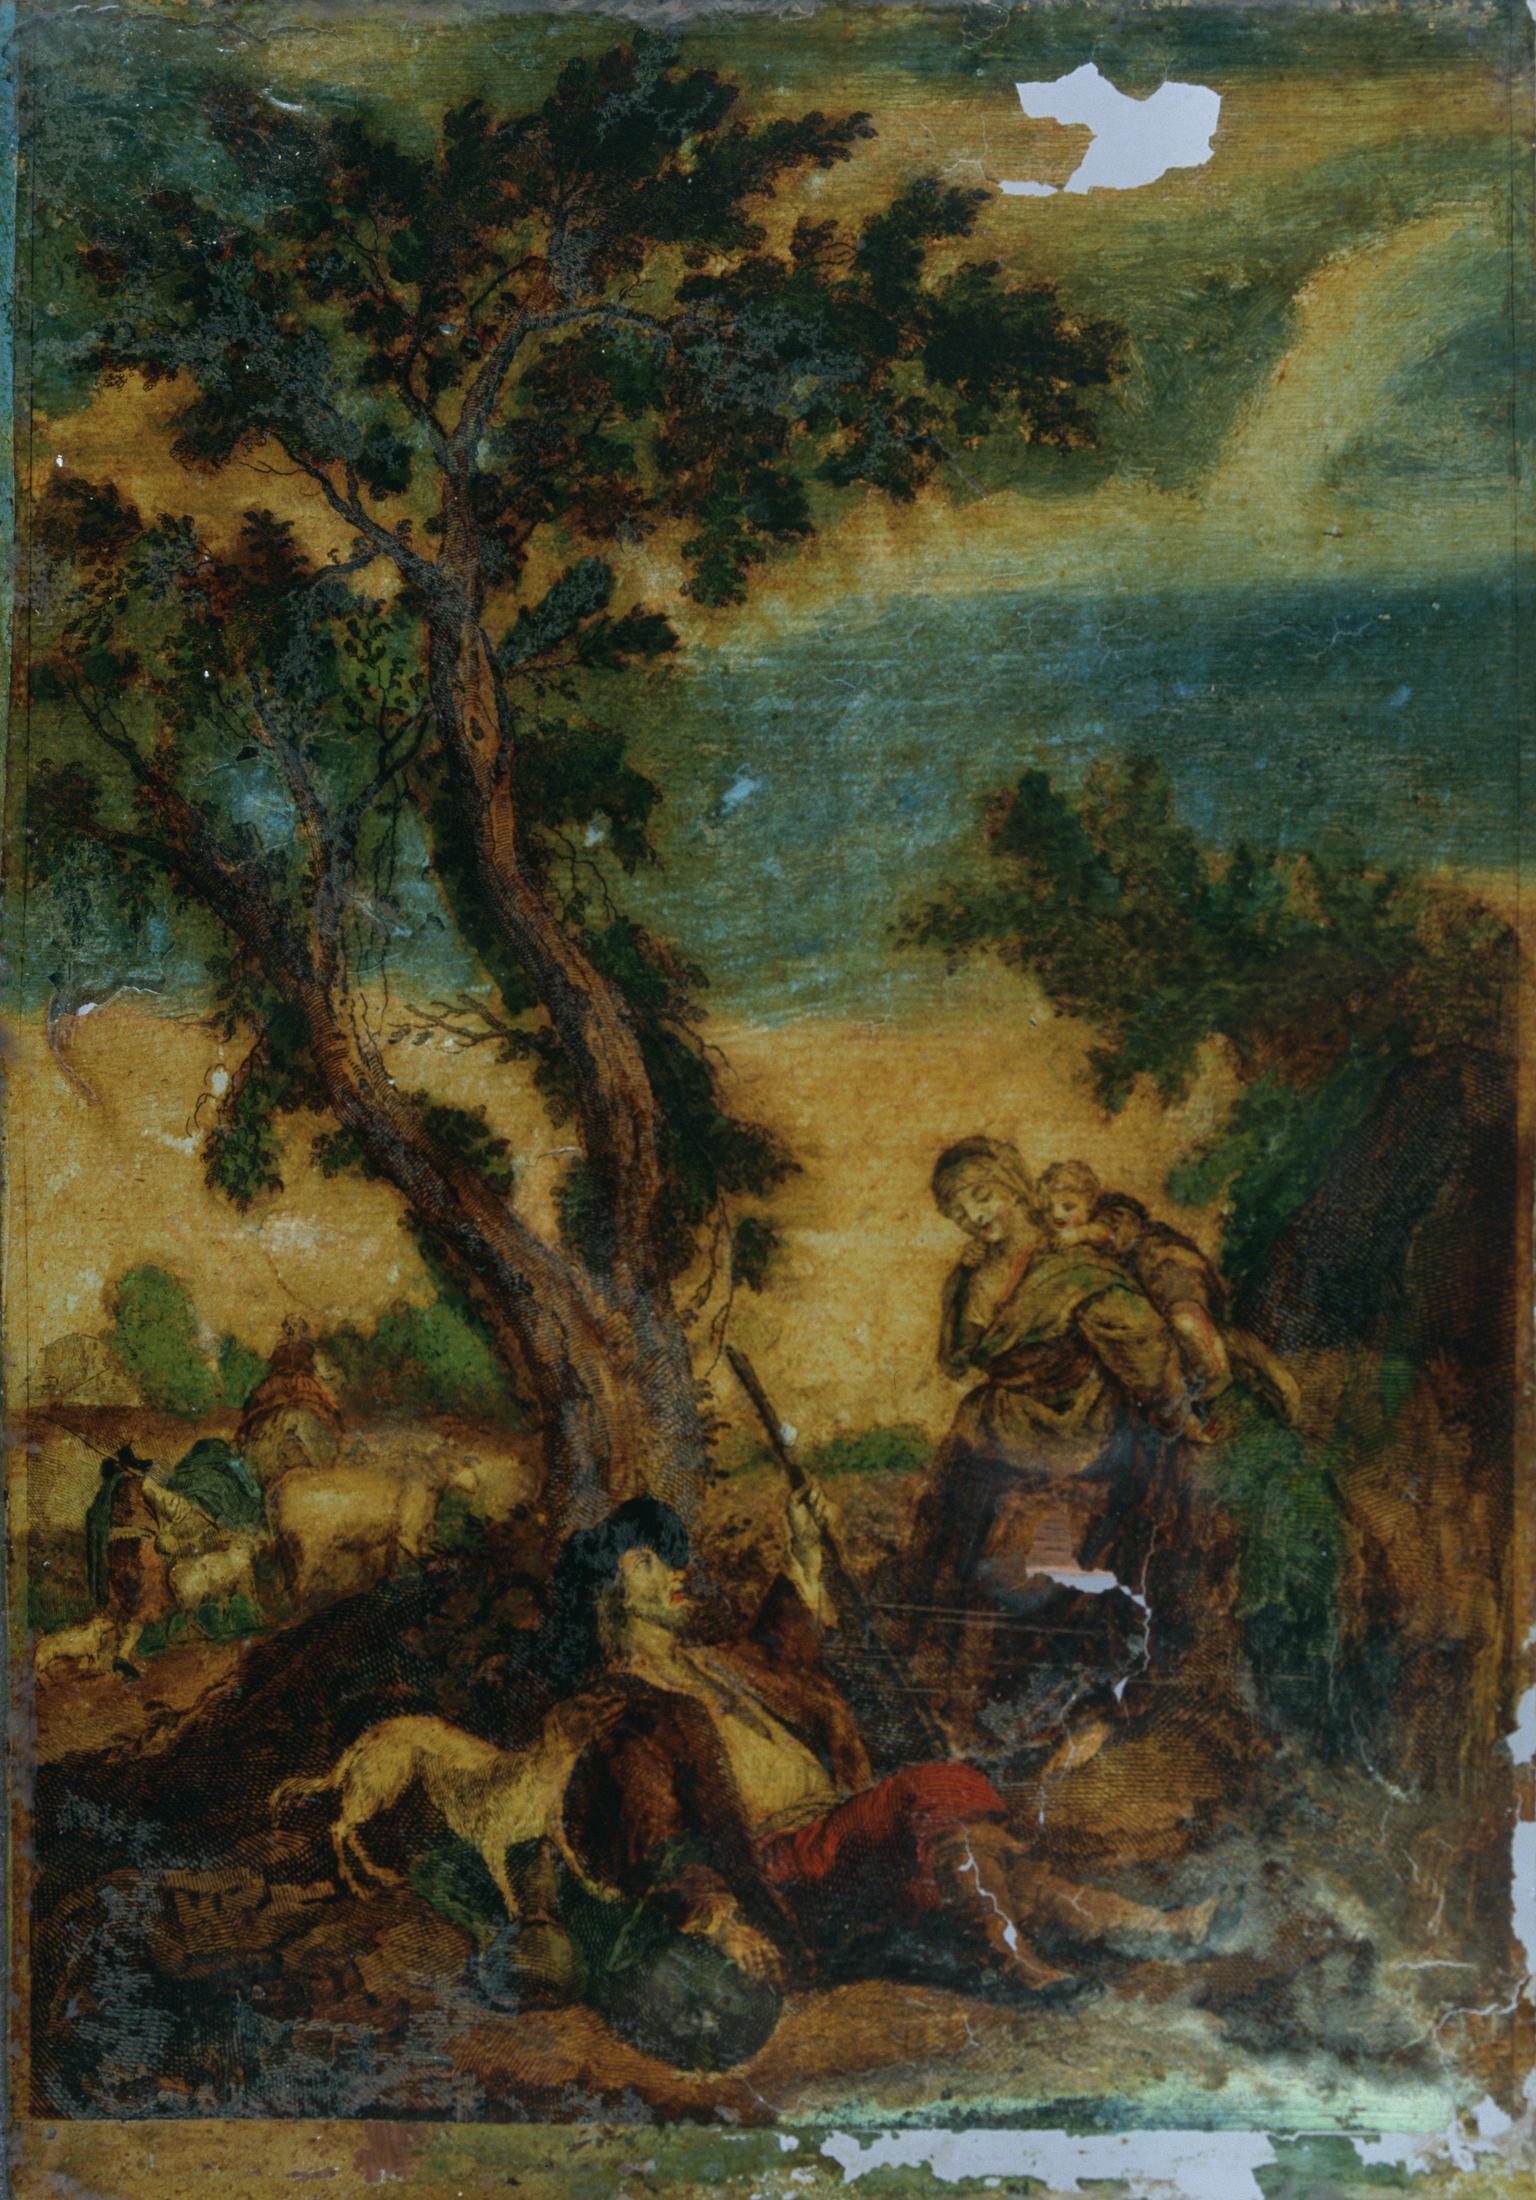 Shepherd beneath a tree watched by woman and child